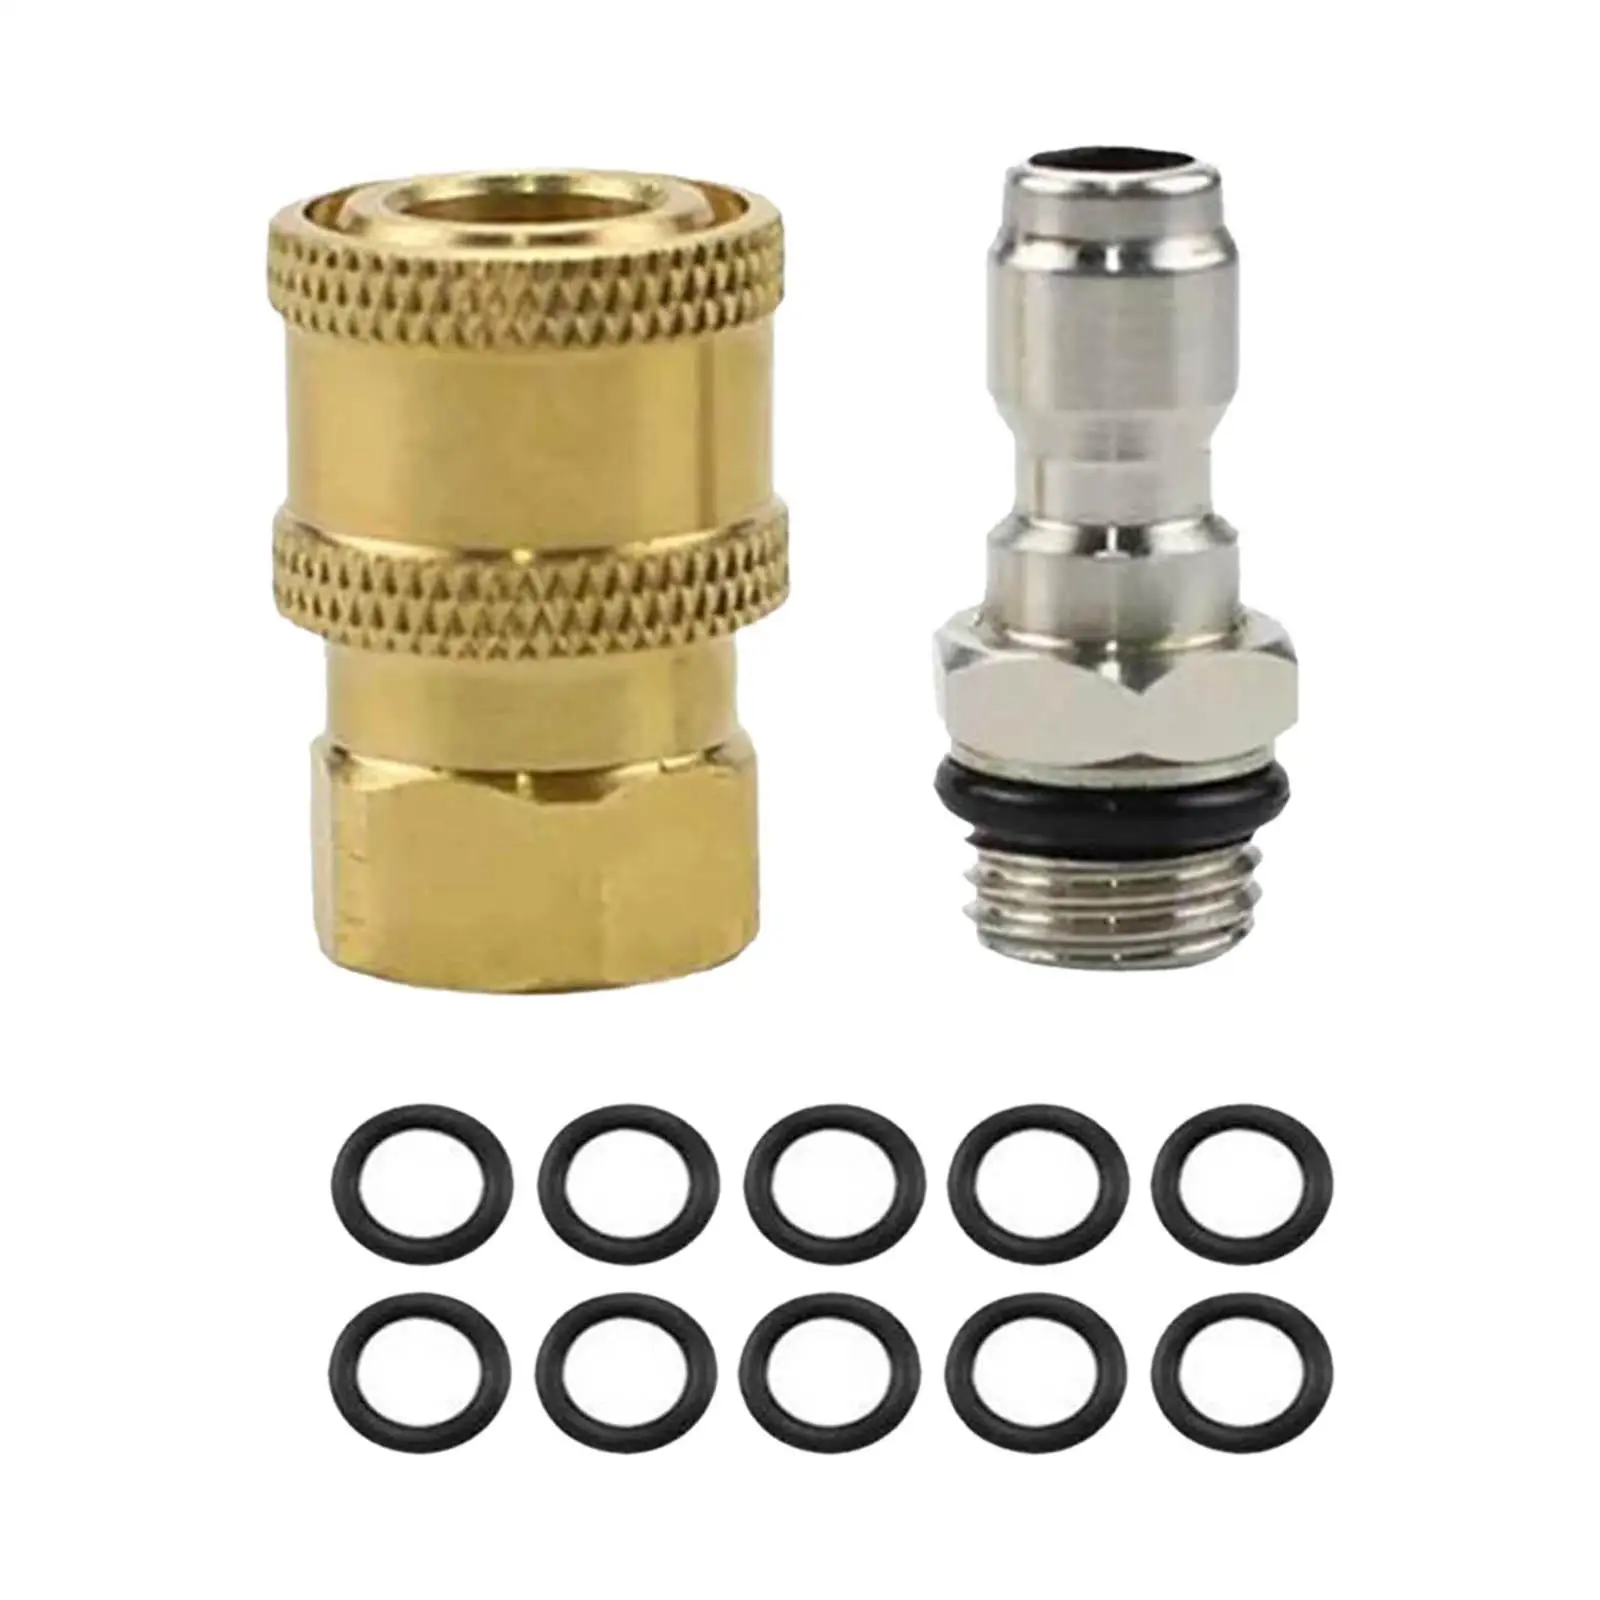 1/4 Inches Quick Disconnect Kit Quick Coupler Fittings Connect and Disconnect Pressure Washer Adapter Set